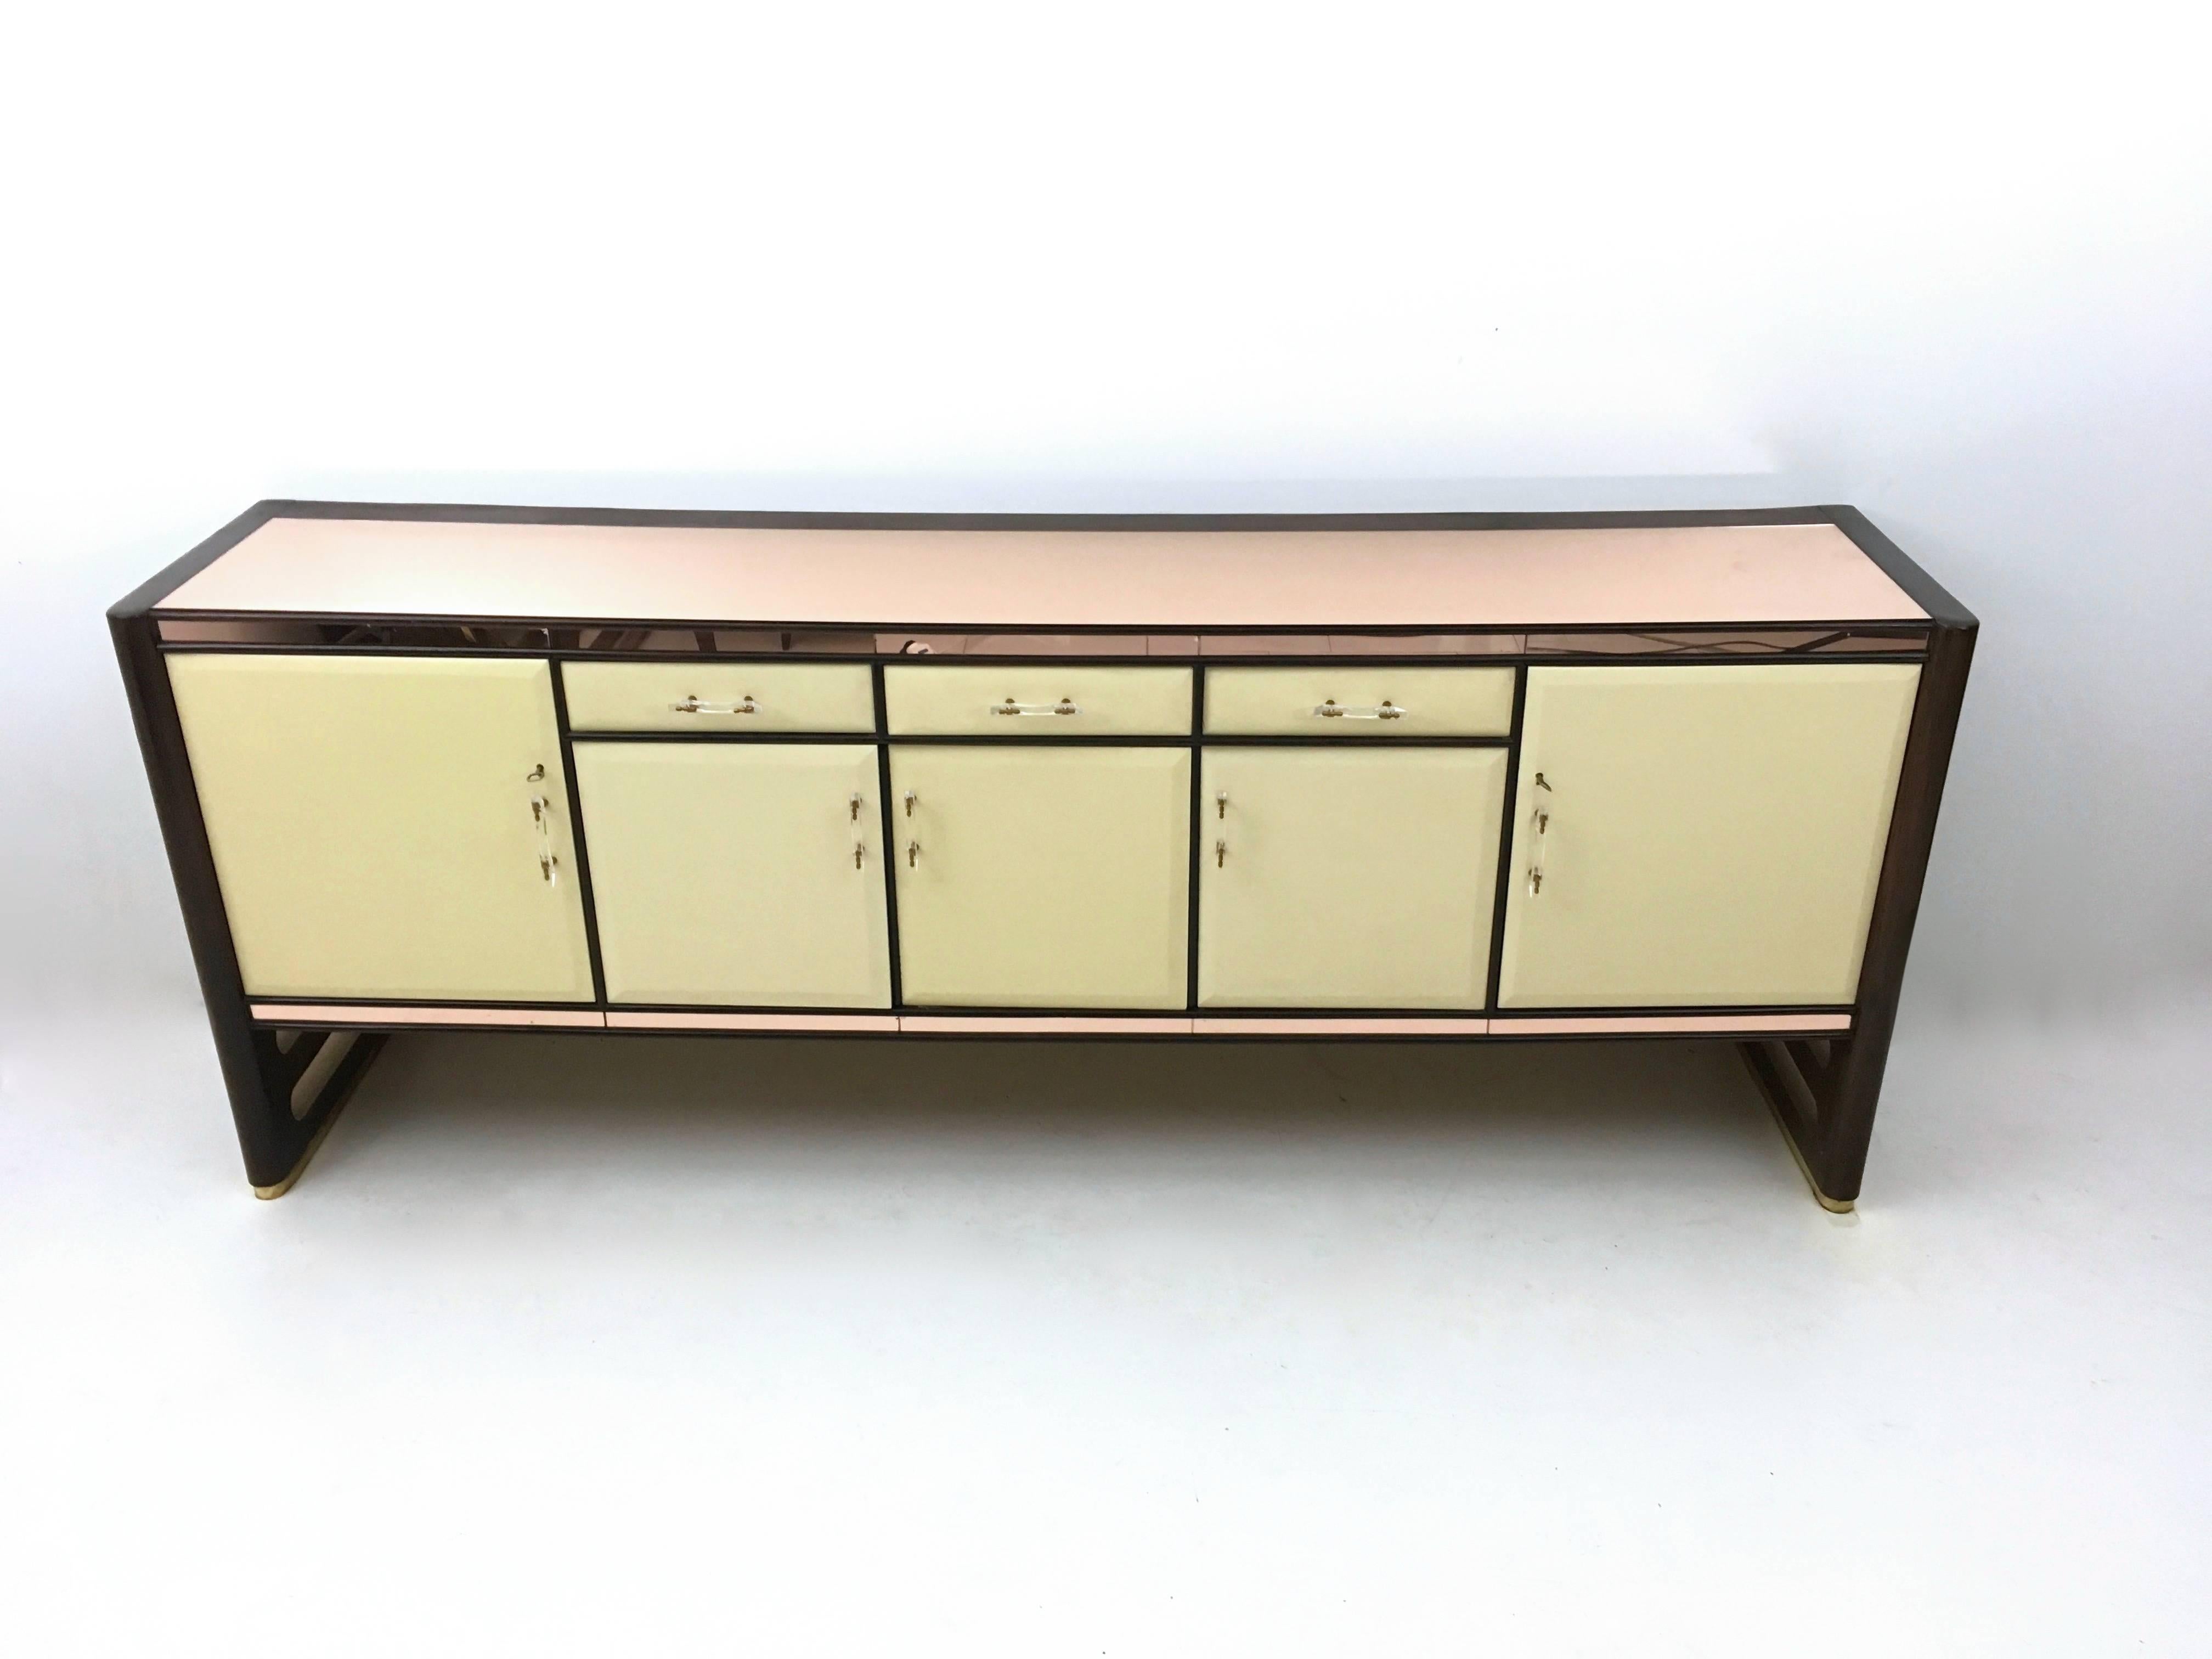 This sideboard is made from wood, with lacquered wood doors, a pink mirror top, brass and perspex handles and maple interiors.